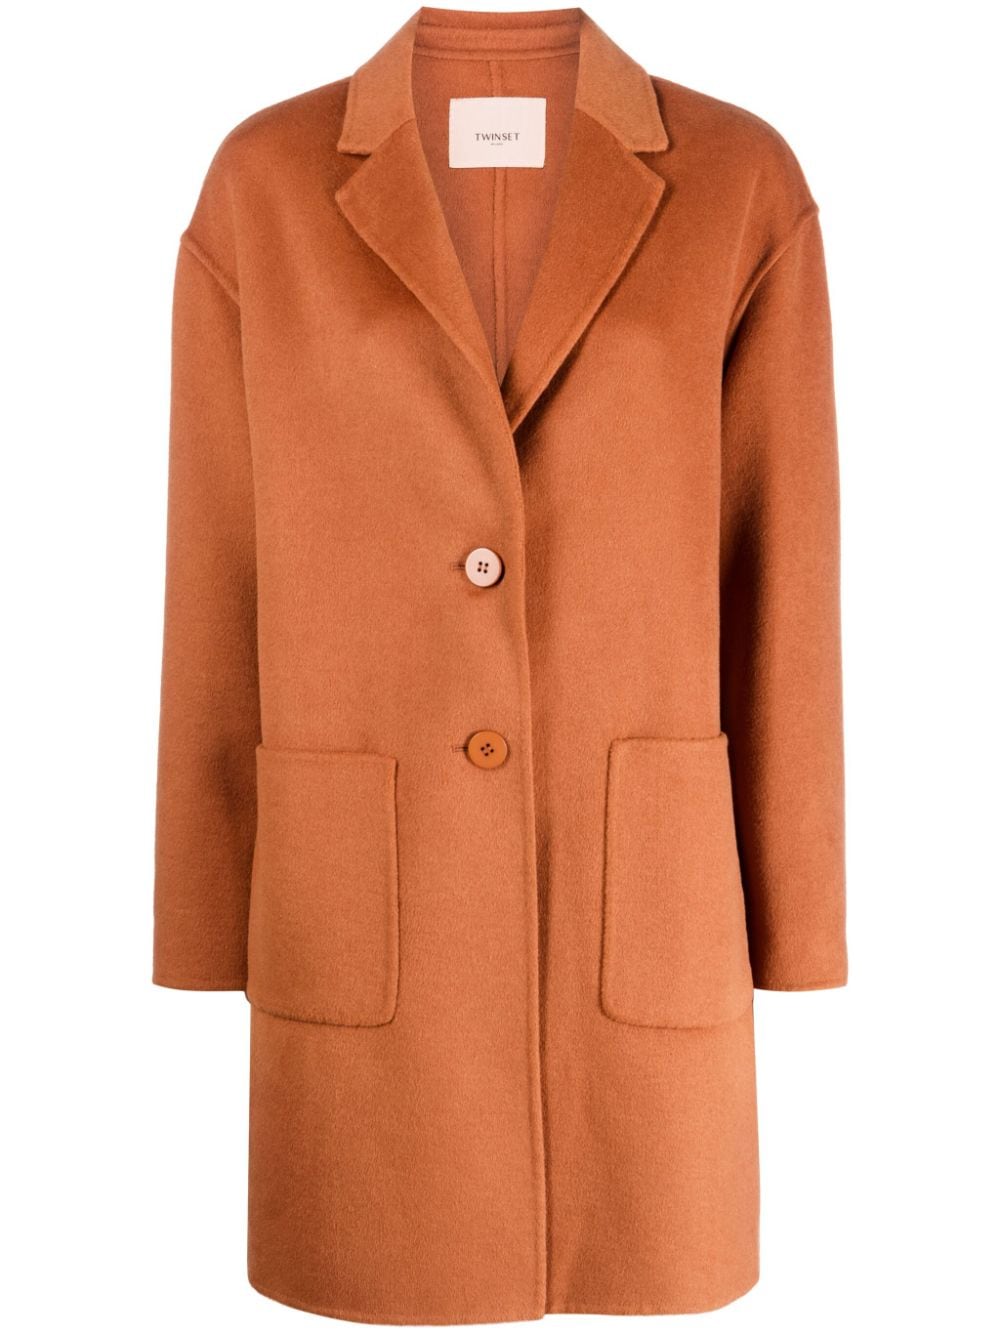 TWINSET brushed-finish single-breasted coat - Brown von TWINSET